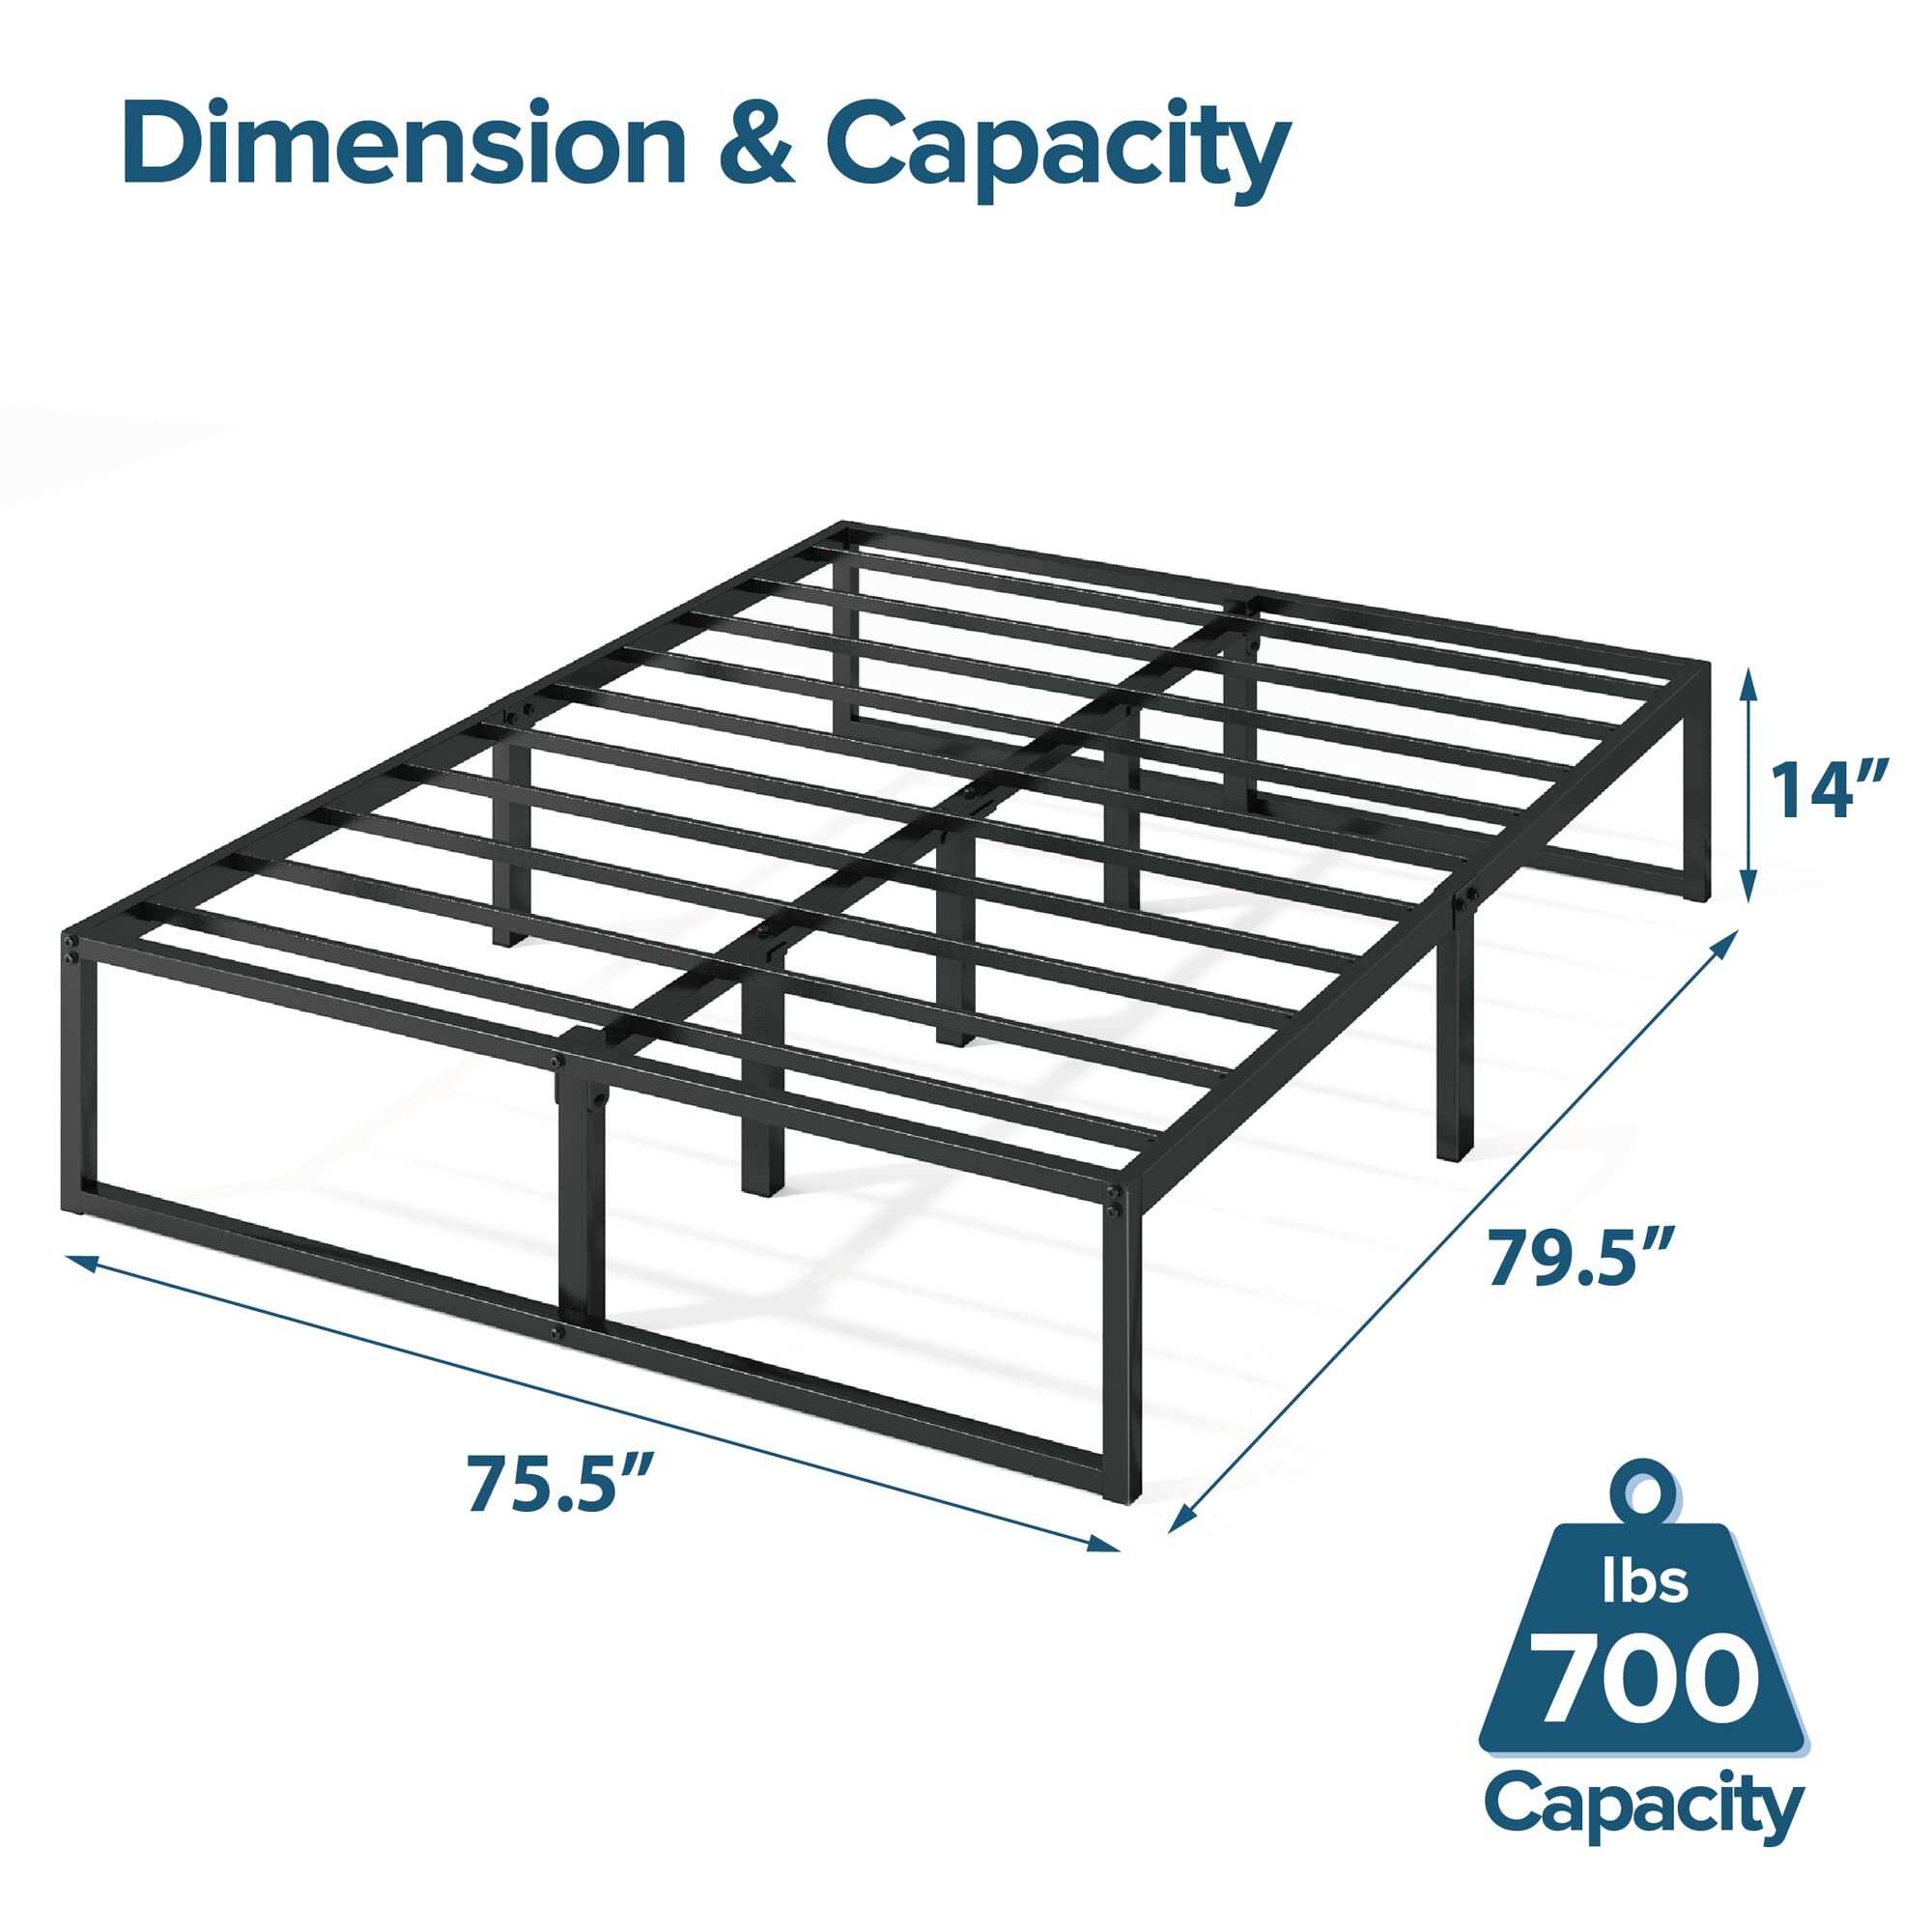 14 Inch Metal Platform Bed Frame, Mattress Foundation with Steel Slat Support, No Box Spring Needed, Easy Assembly